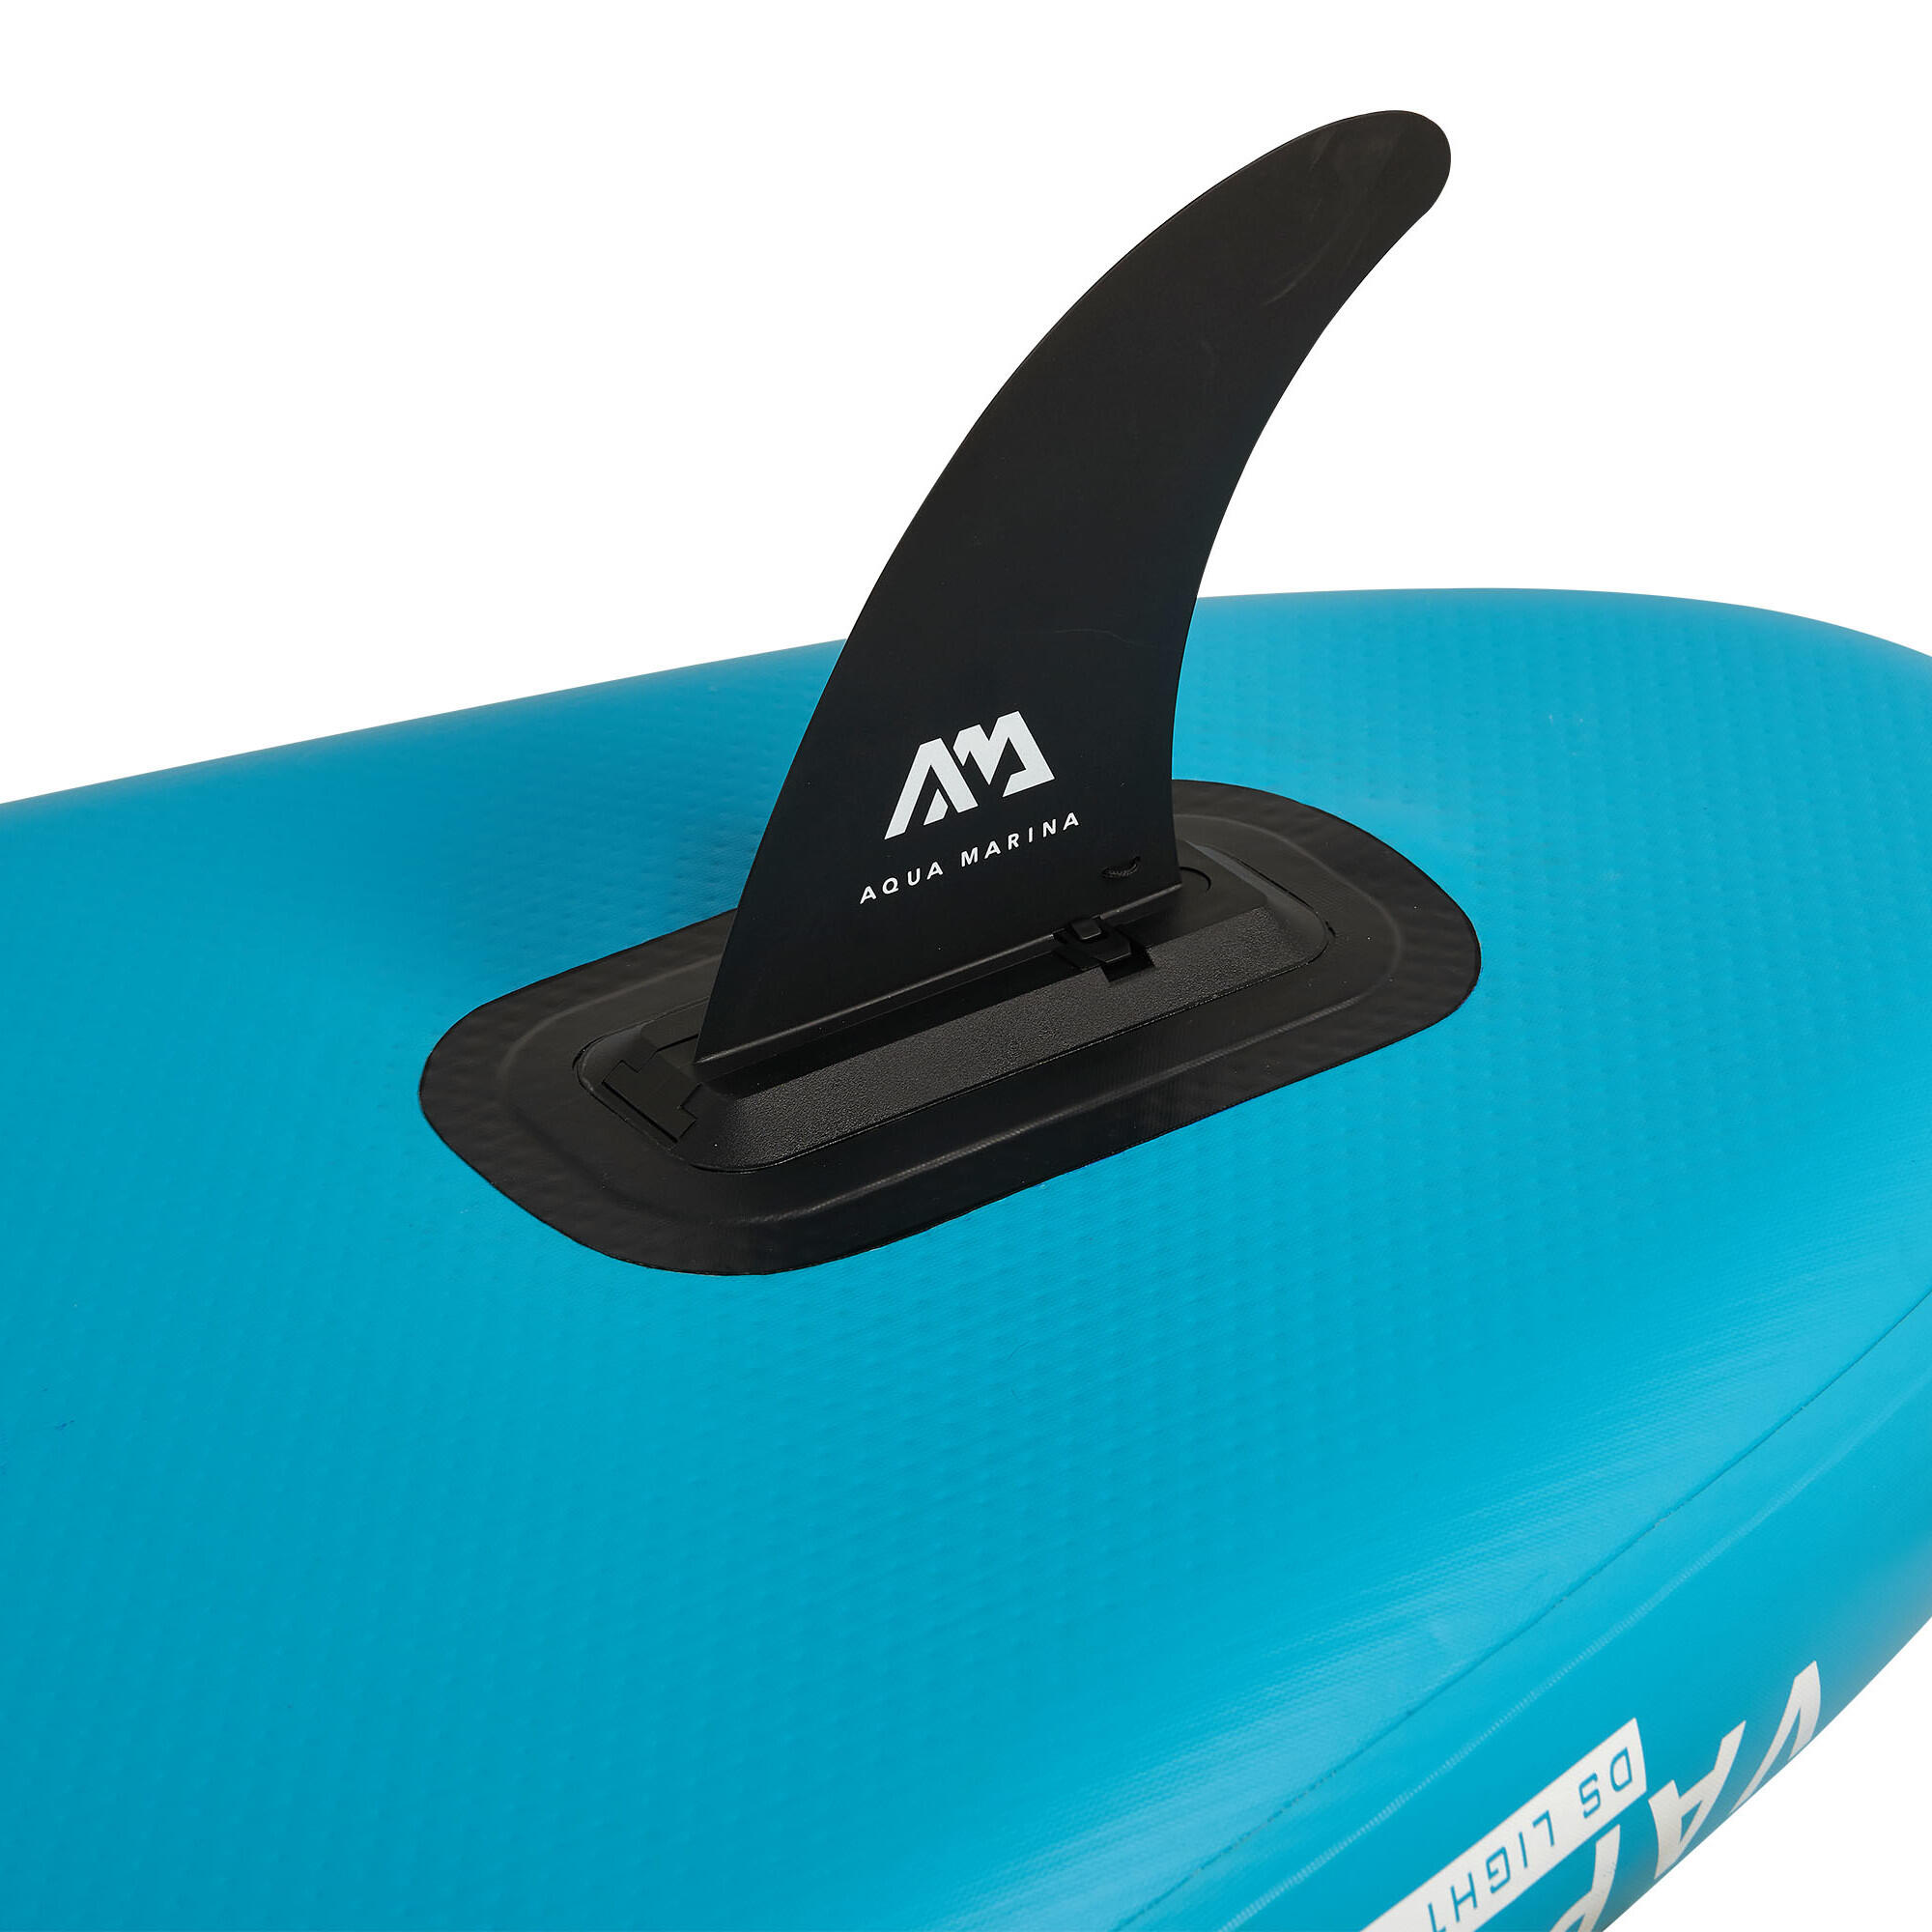 Aqua Marina Vapor stand-up paddle board package 10ft4/315cm 11/16